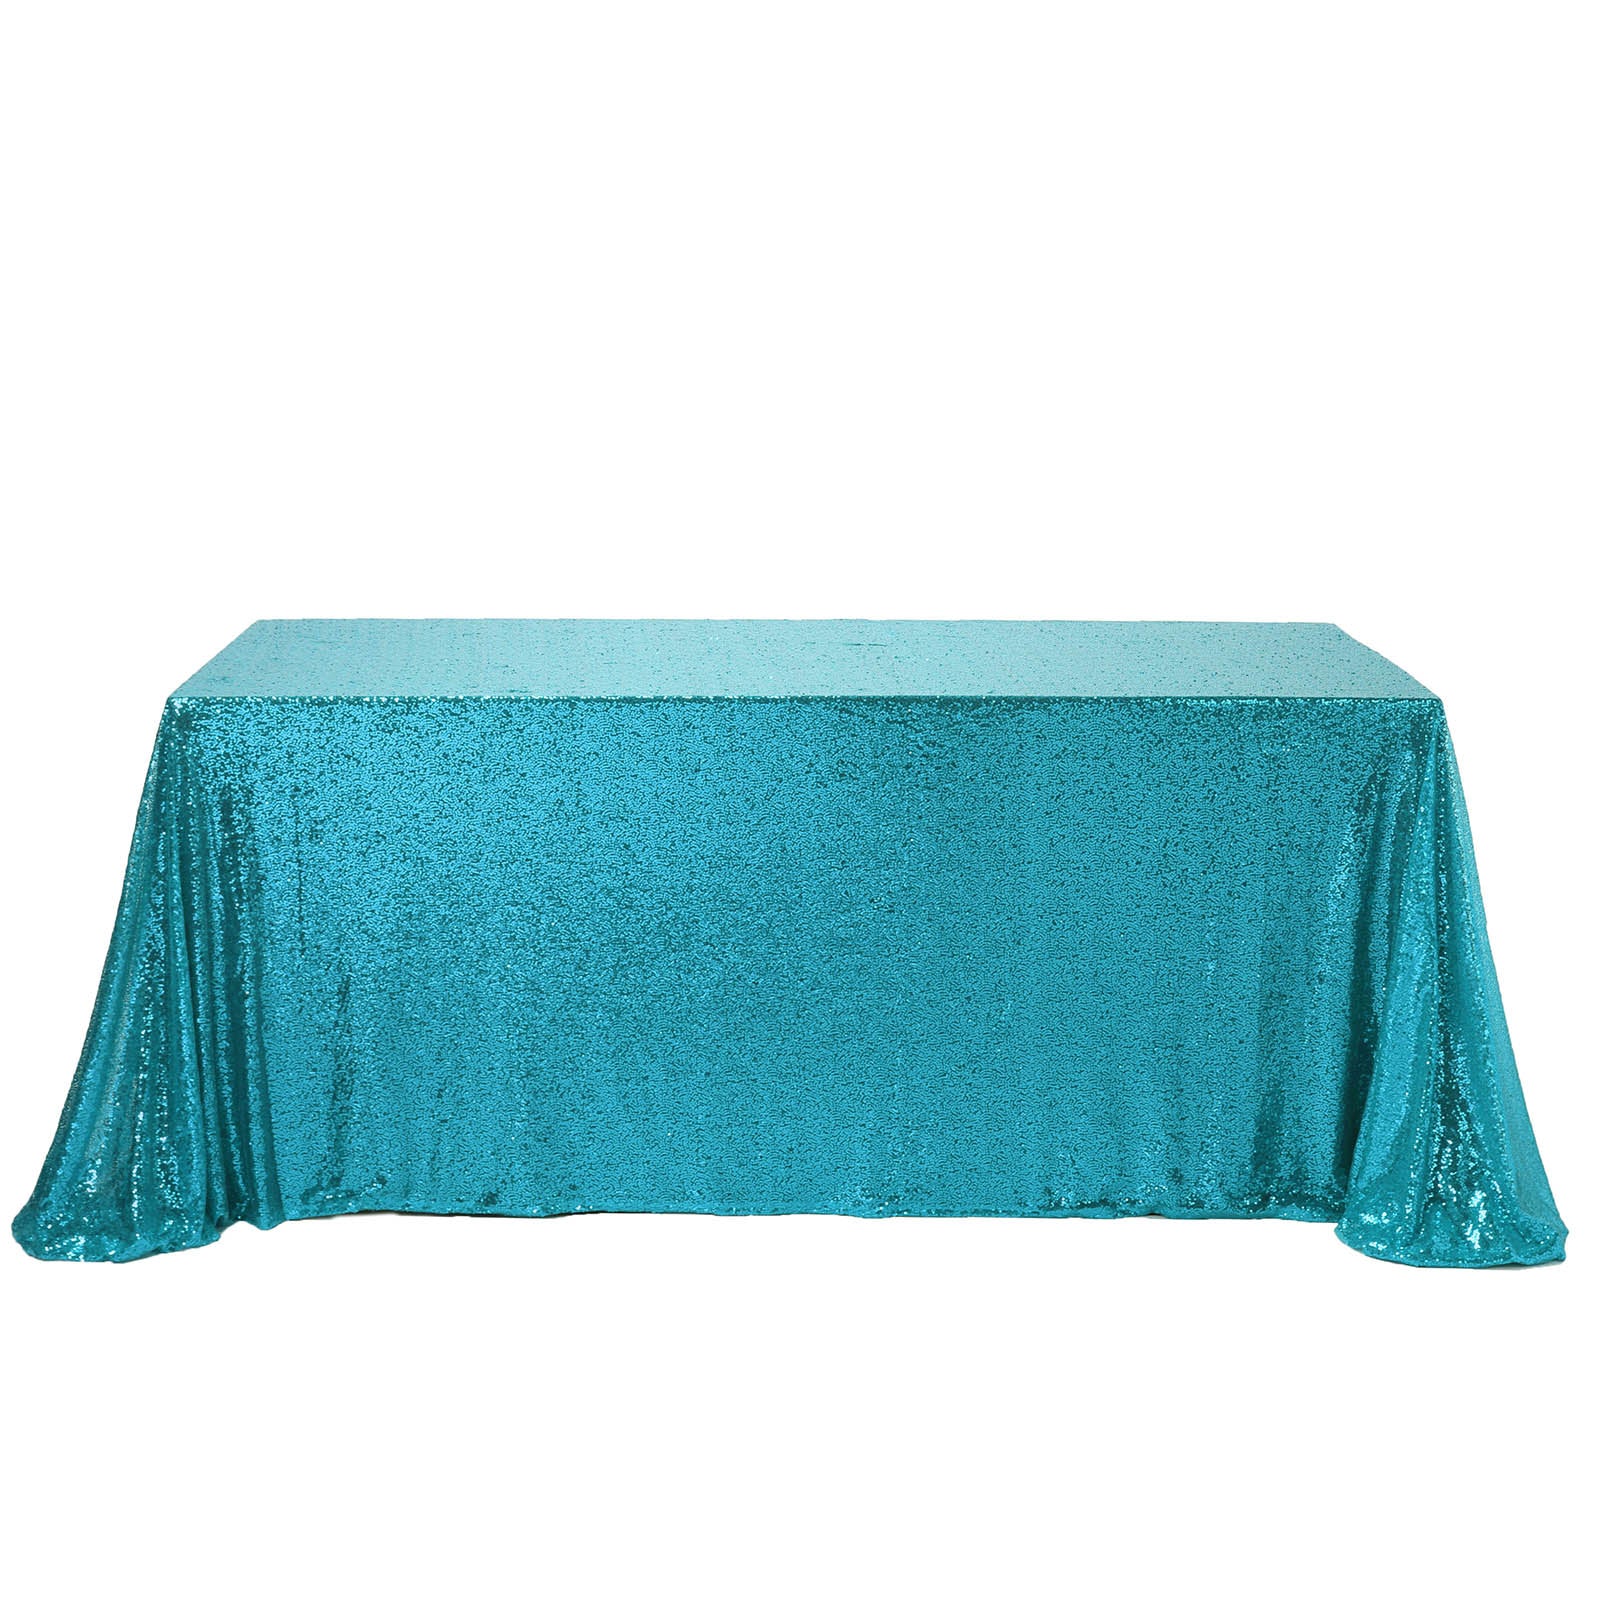 90x156 Turquoise Premium Sequin Rectangle Tablecloth Tableclothsfactory